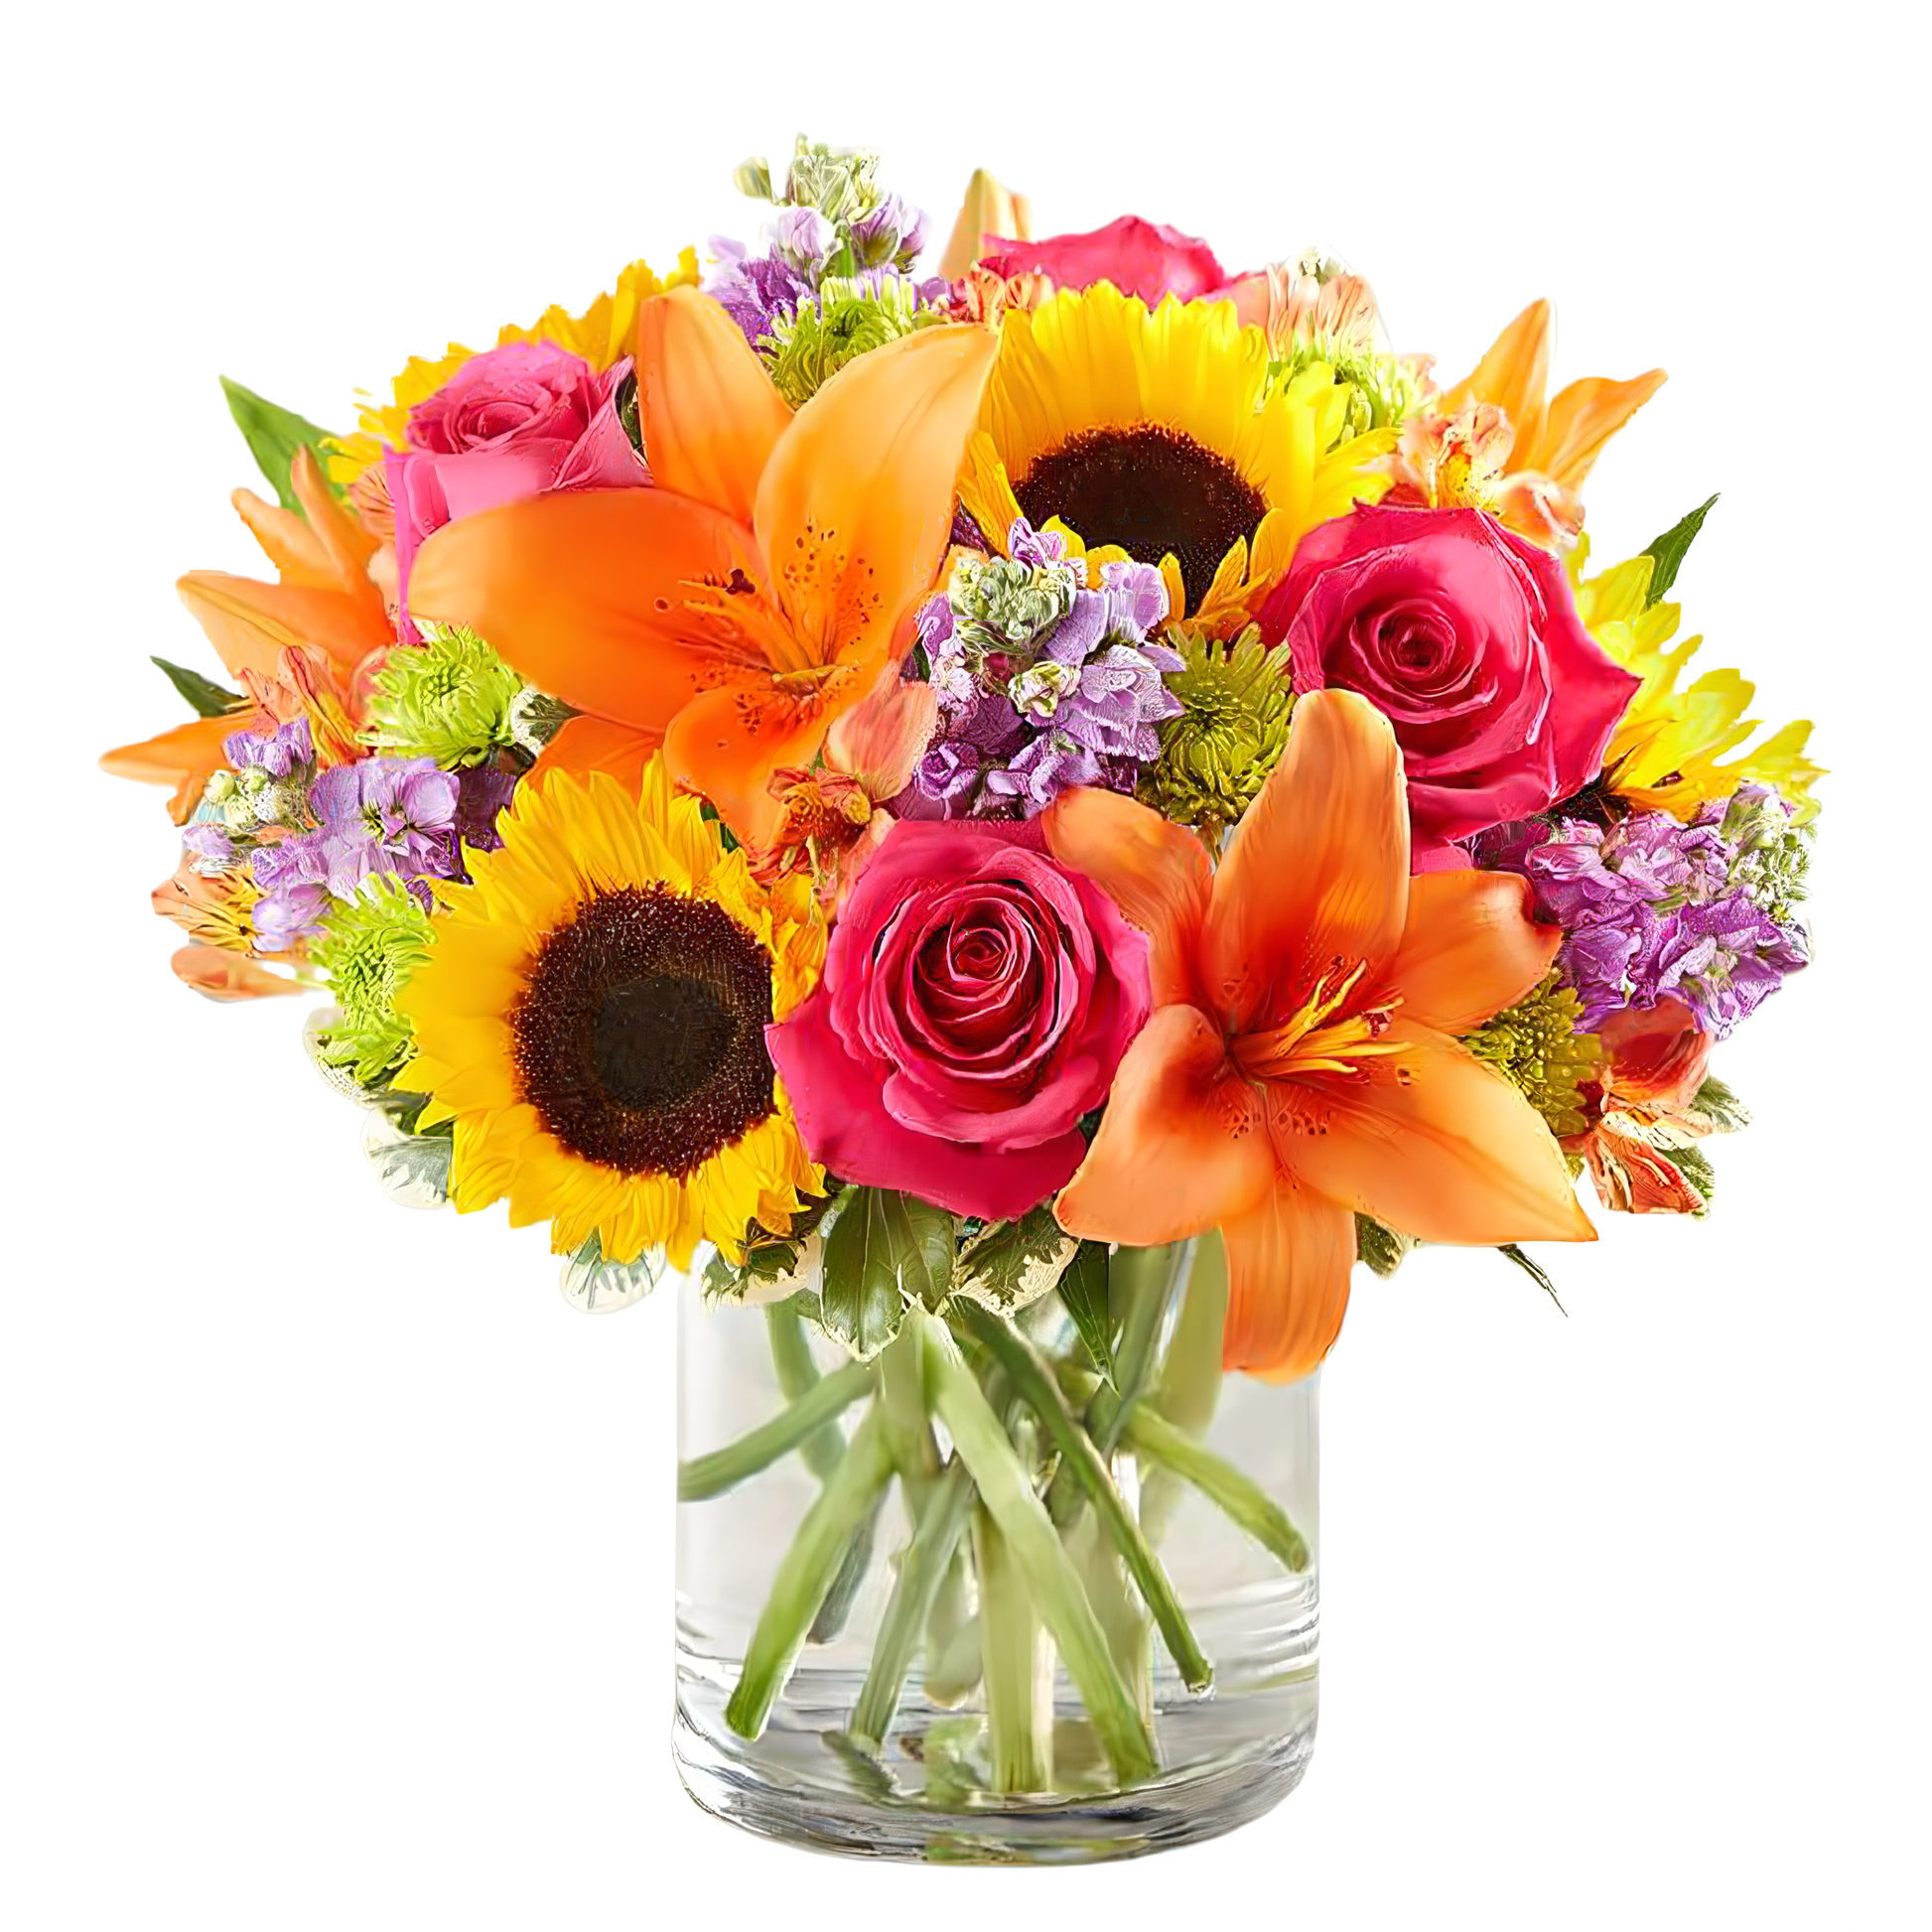 NYC Flower Delivery - Floral Fantasy - Birthdays